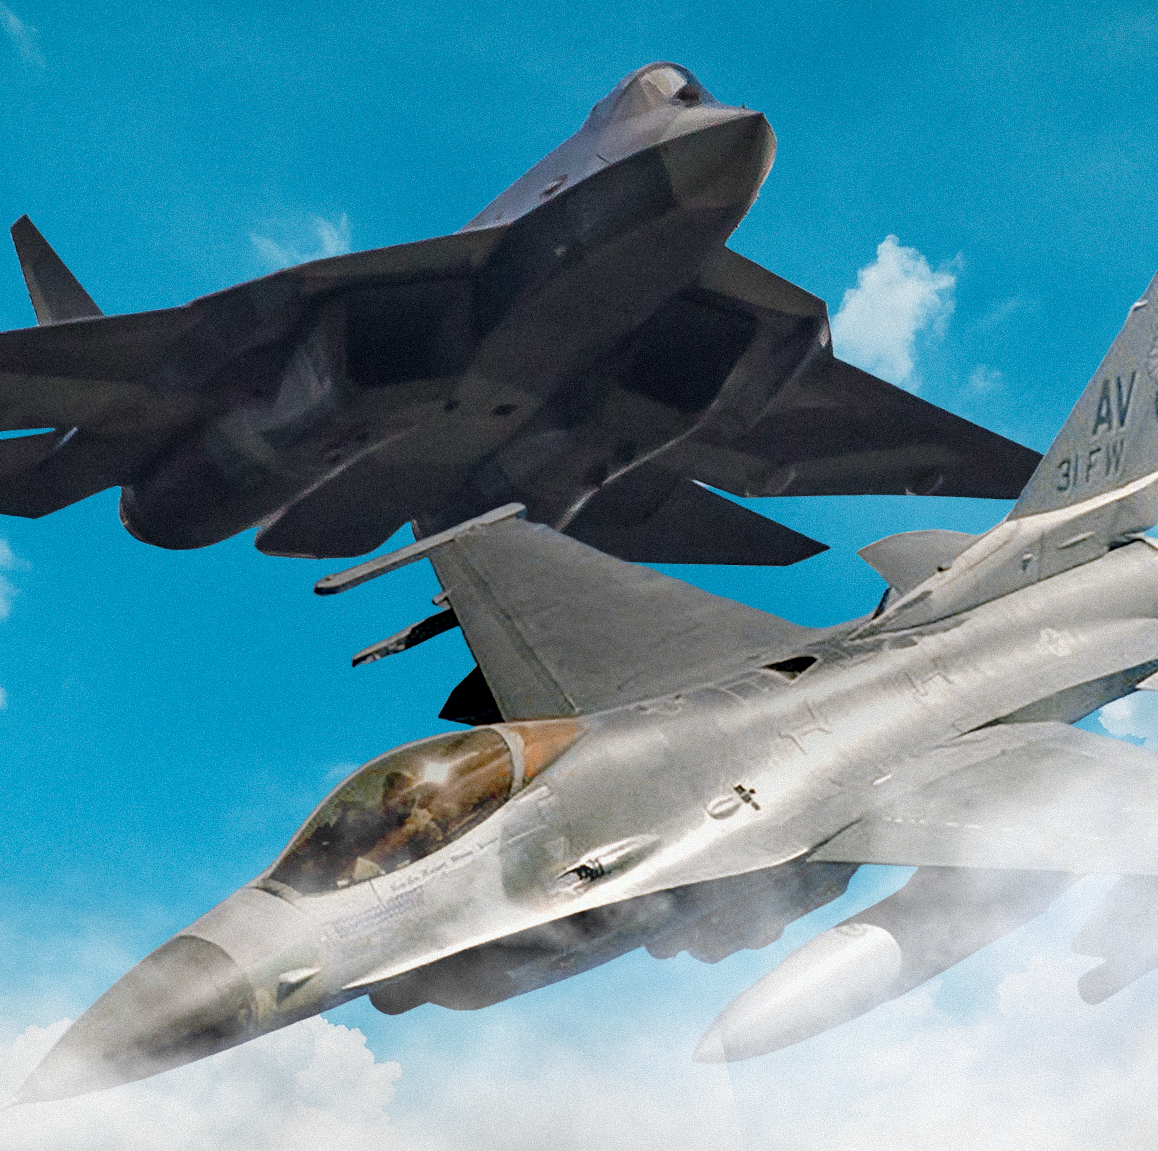 Can America's Aging, But Mighty F-16 Overpower One of Russia's Most Advanced Fighters?